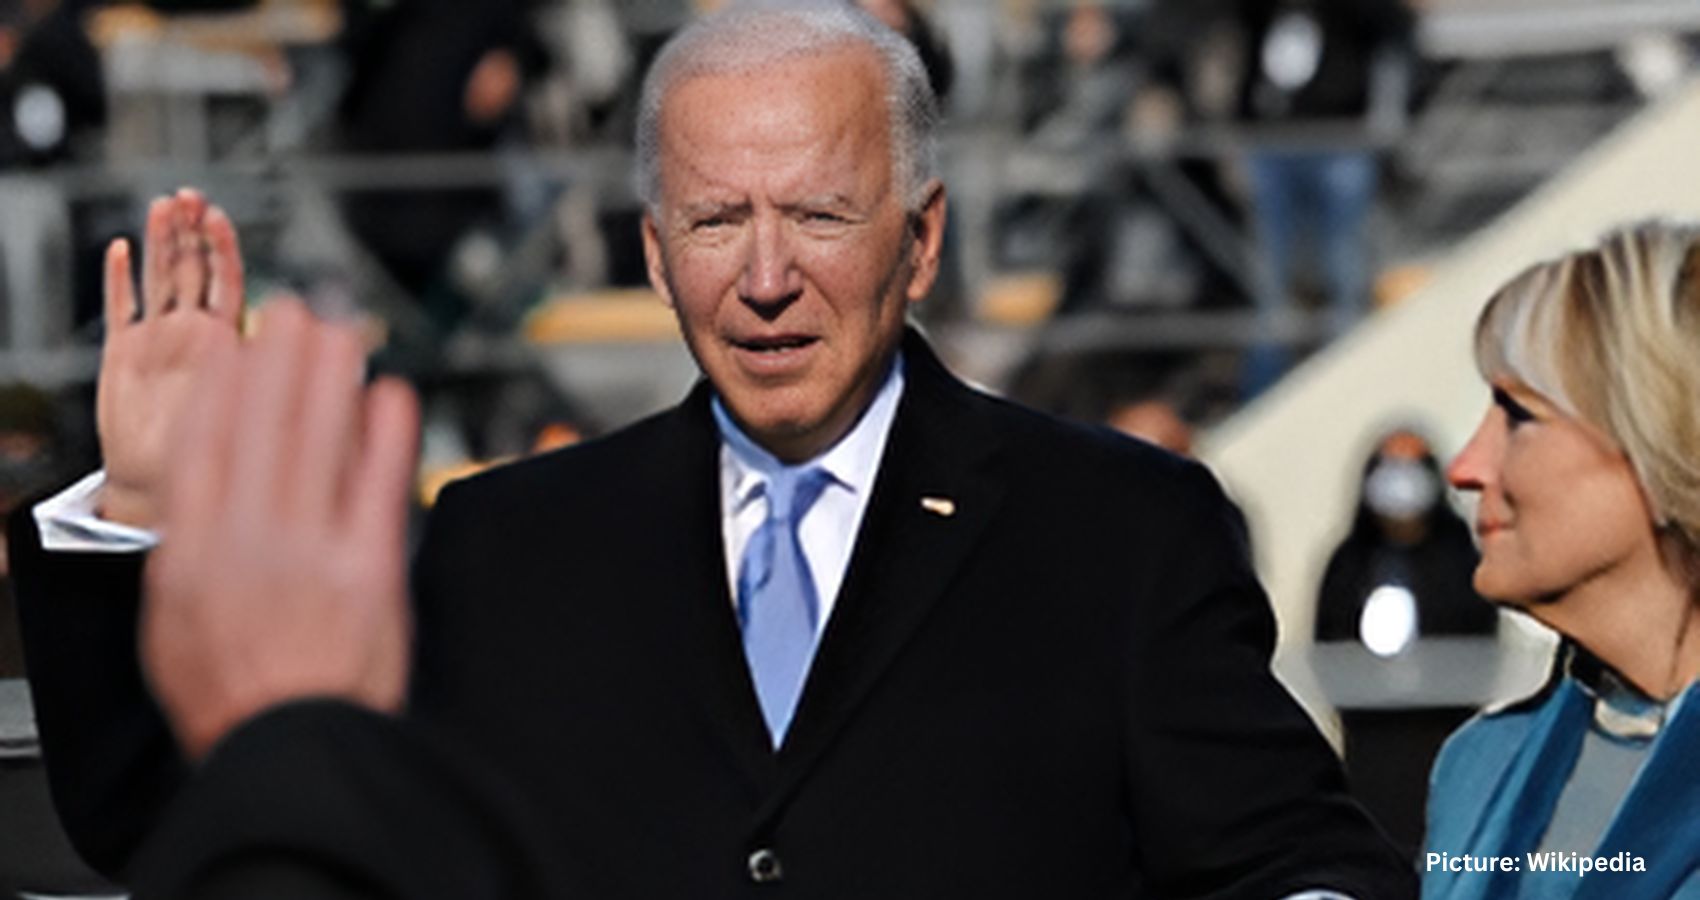 Featured & Cover Replacing Biden as Democratic Nominee Unlikely and Complicated Process Unless Voluntary Withdrawal Occurs